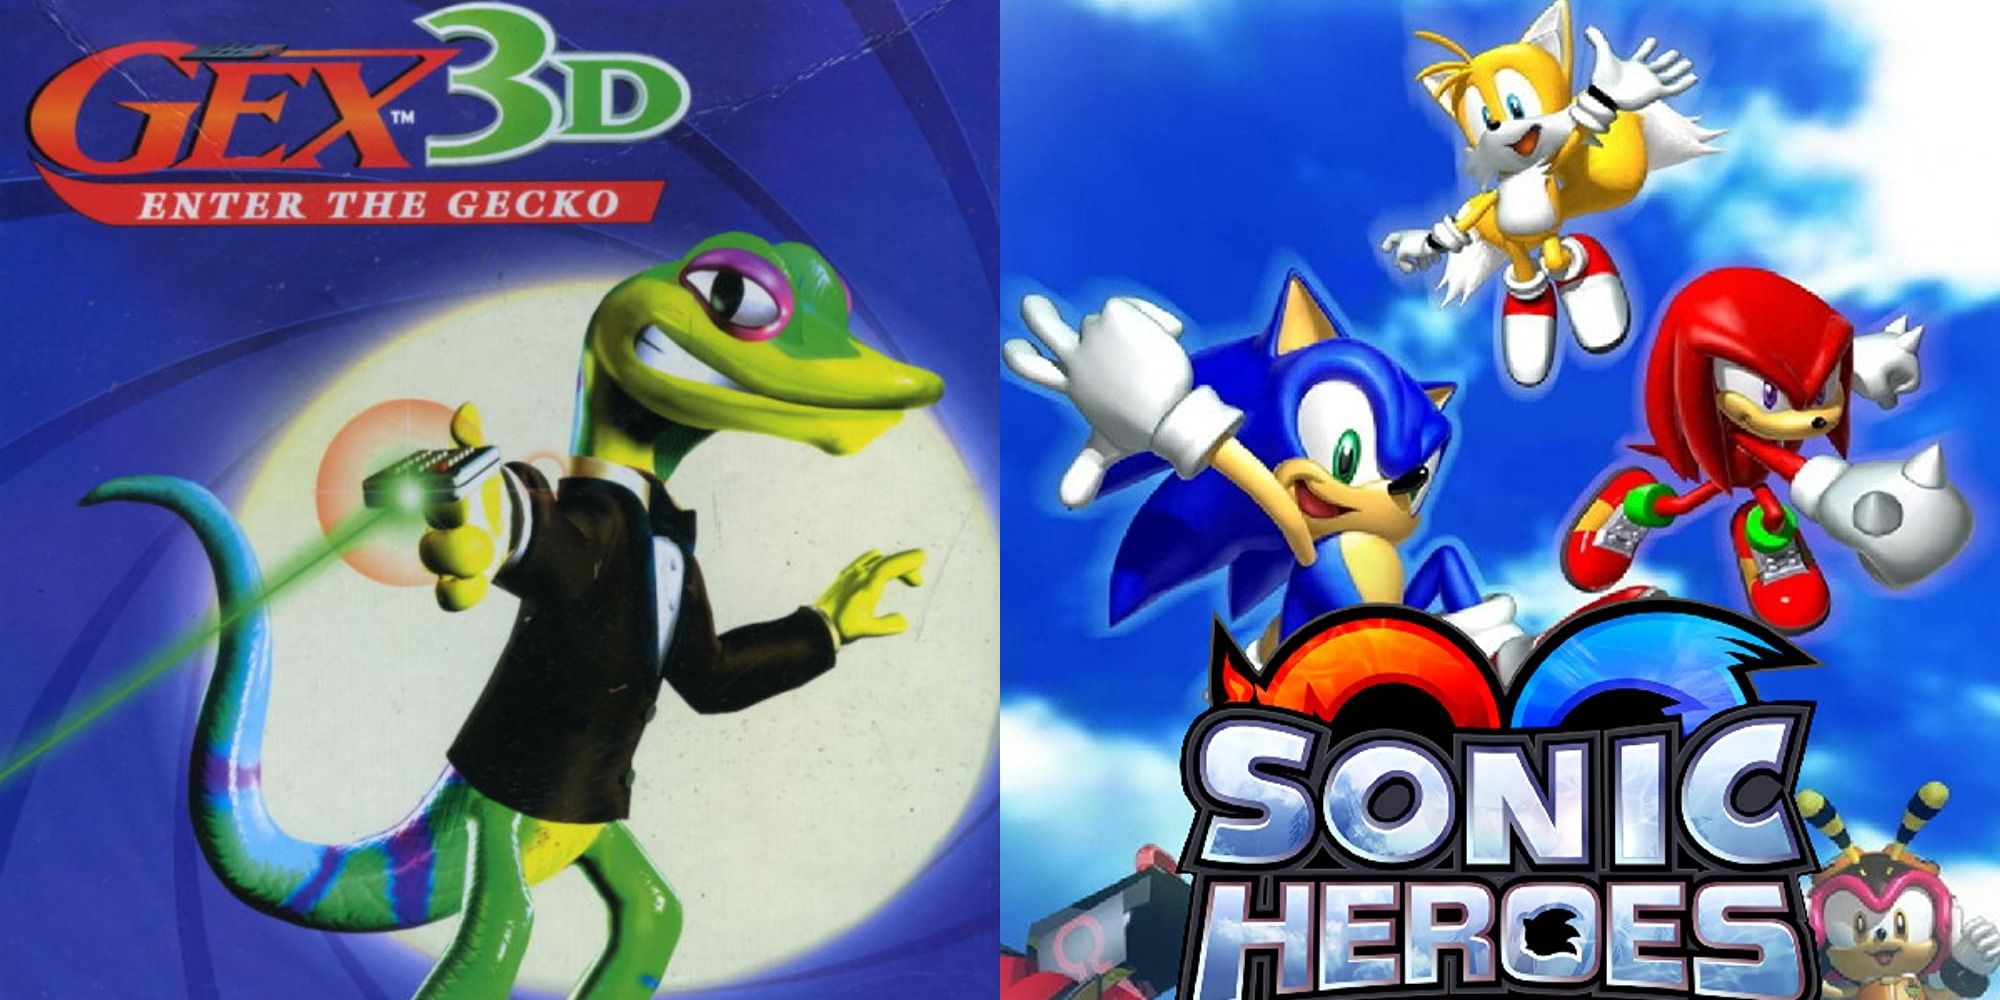 Split image showing covers for Gex Enter The Gecko and Sonic Heroes